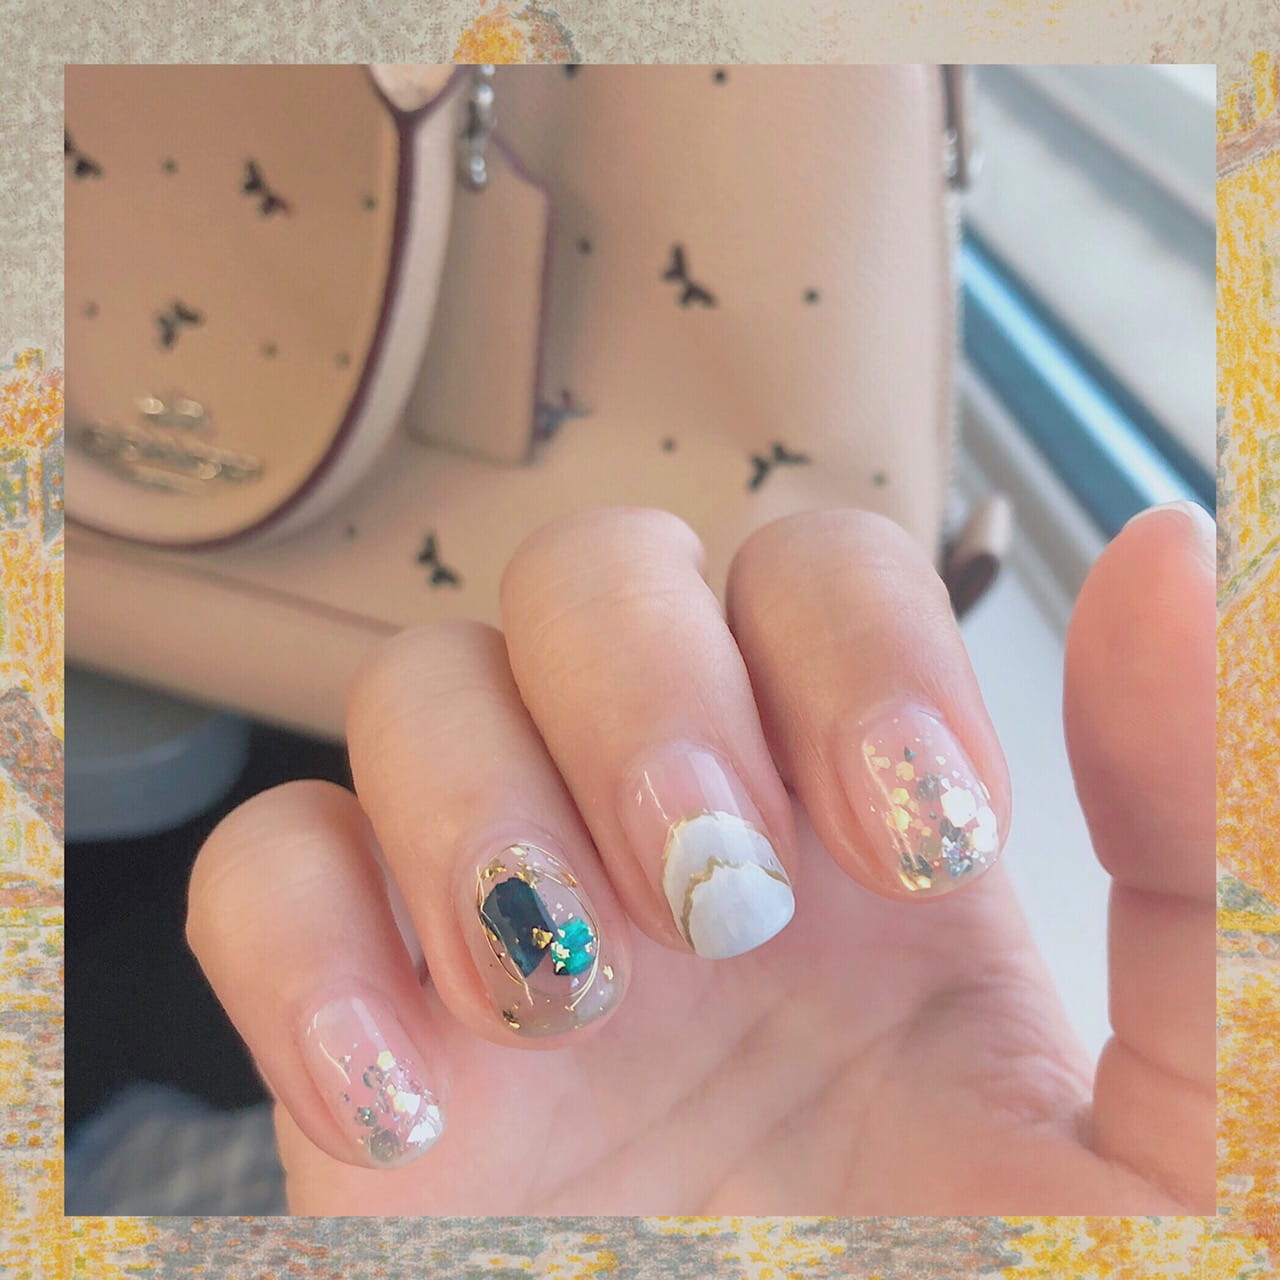 100+ Short Nail Designs You’ll Want To Try This Year images 44